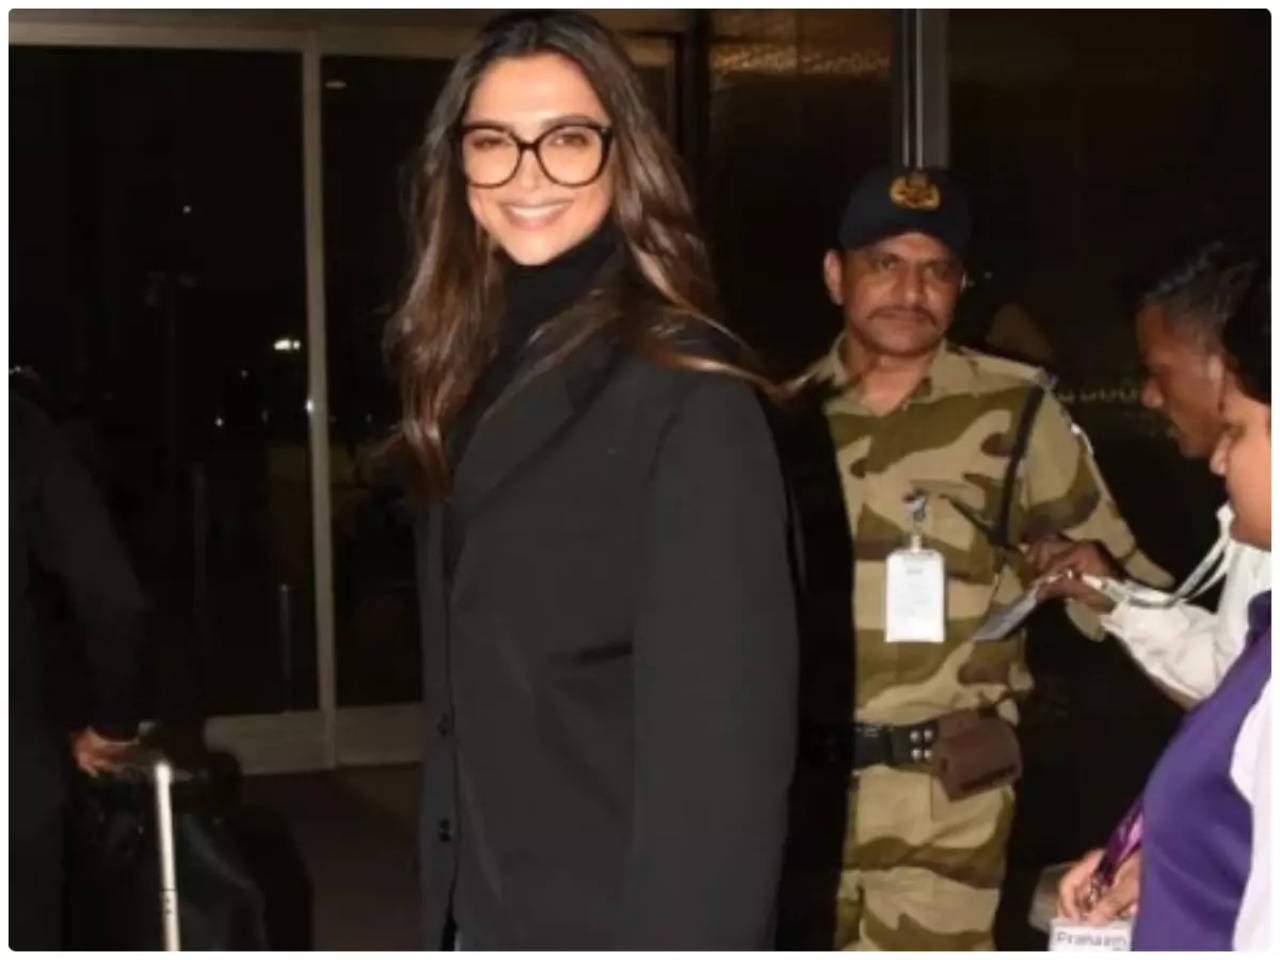 Deepika Padukone Makes Stylish Appearance at the Airport as She